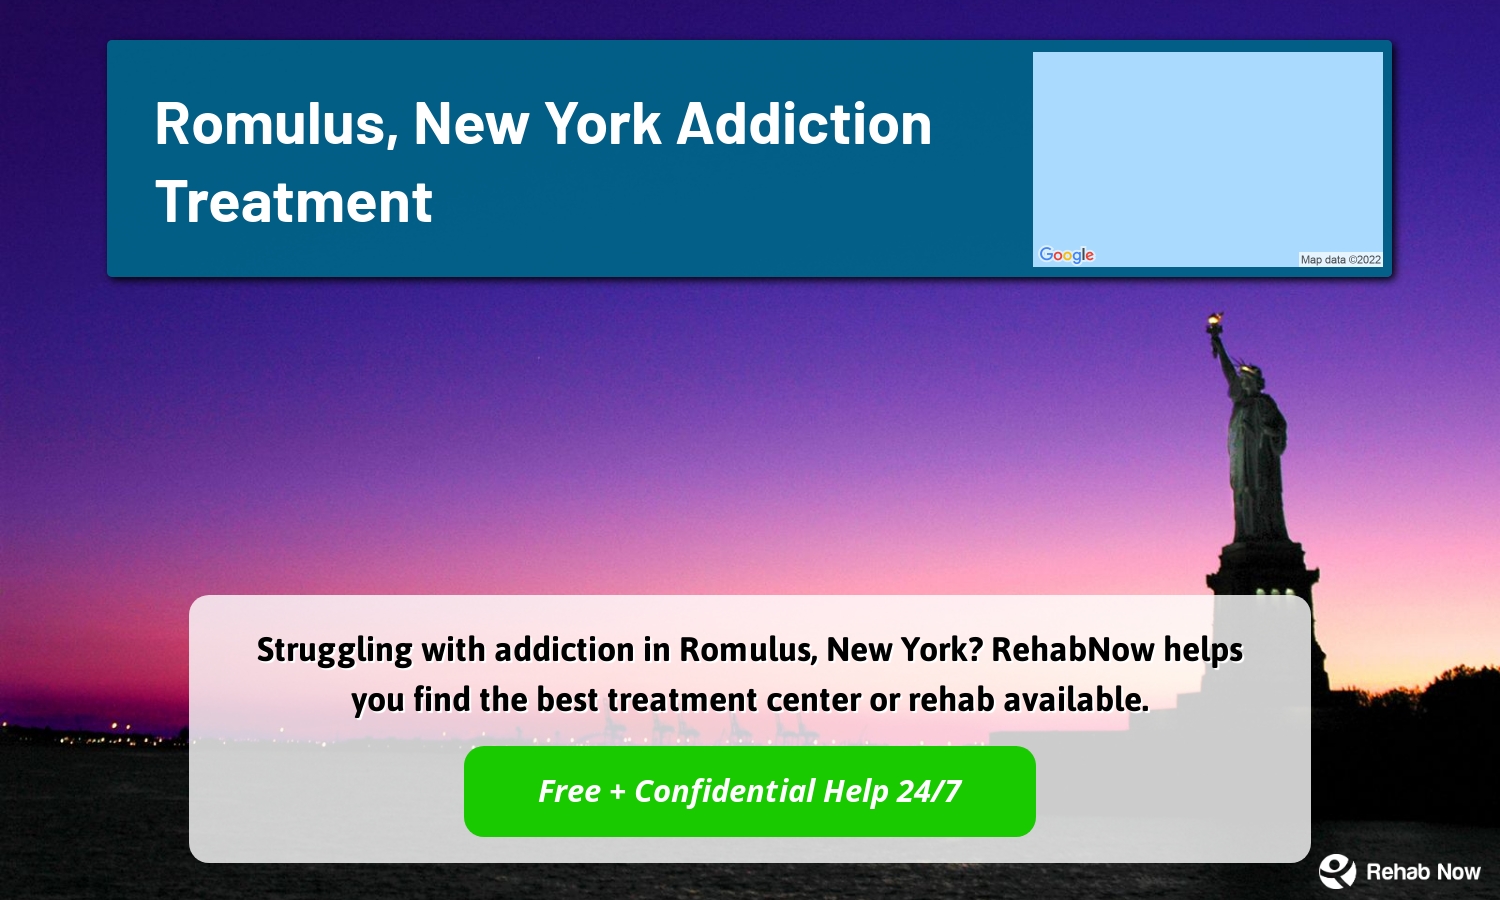 Struggling with addiction in Romulus, New York? RehabNow helps you find the best treatment center or rehab available.